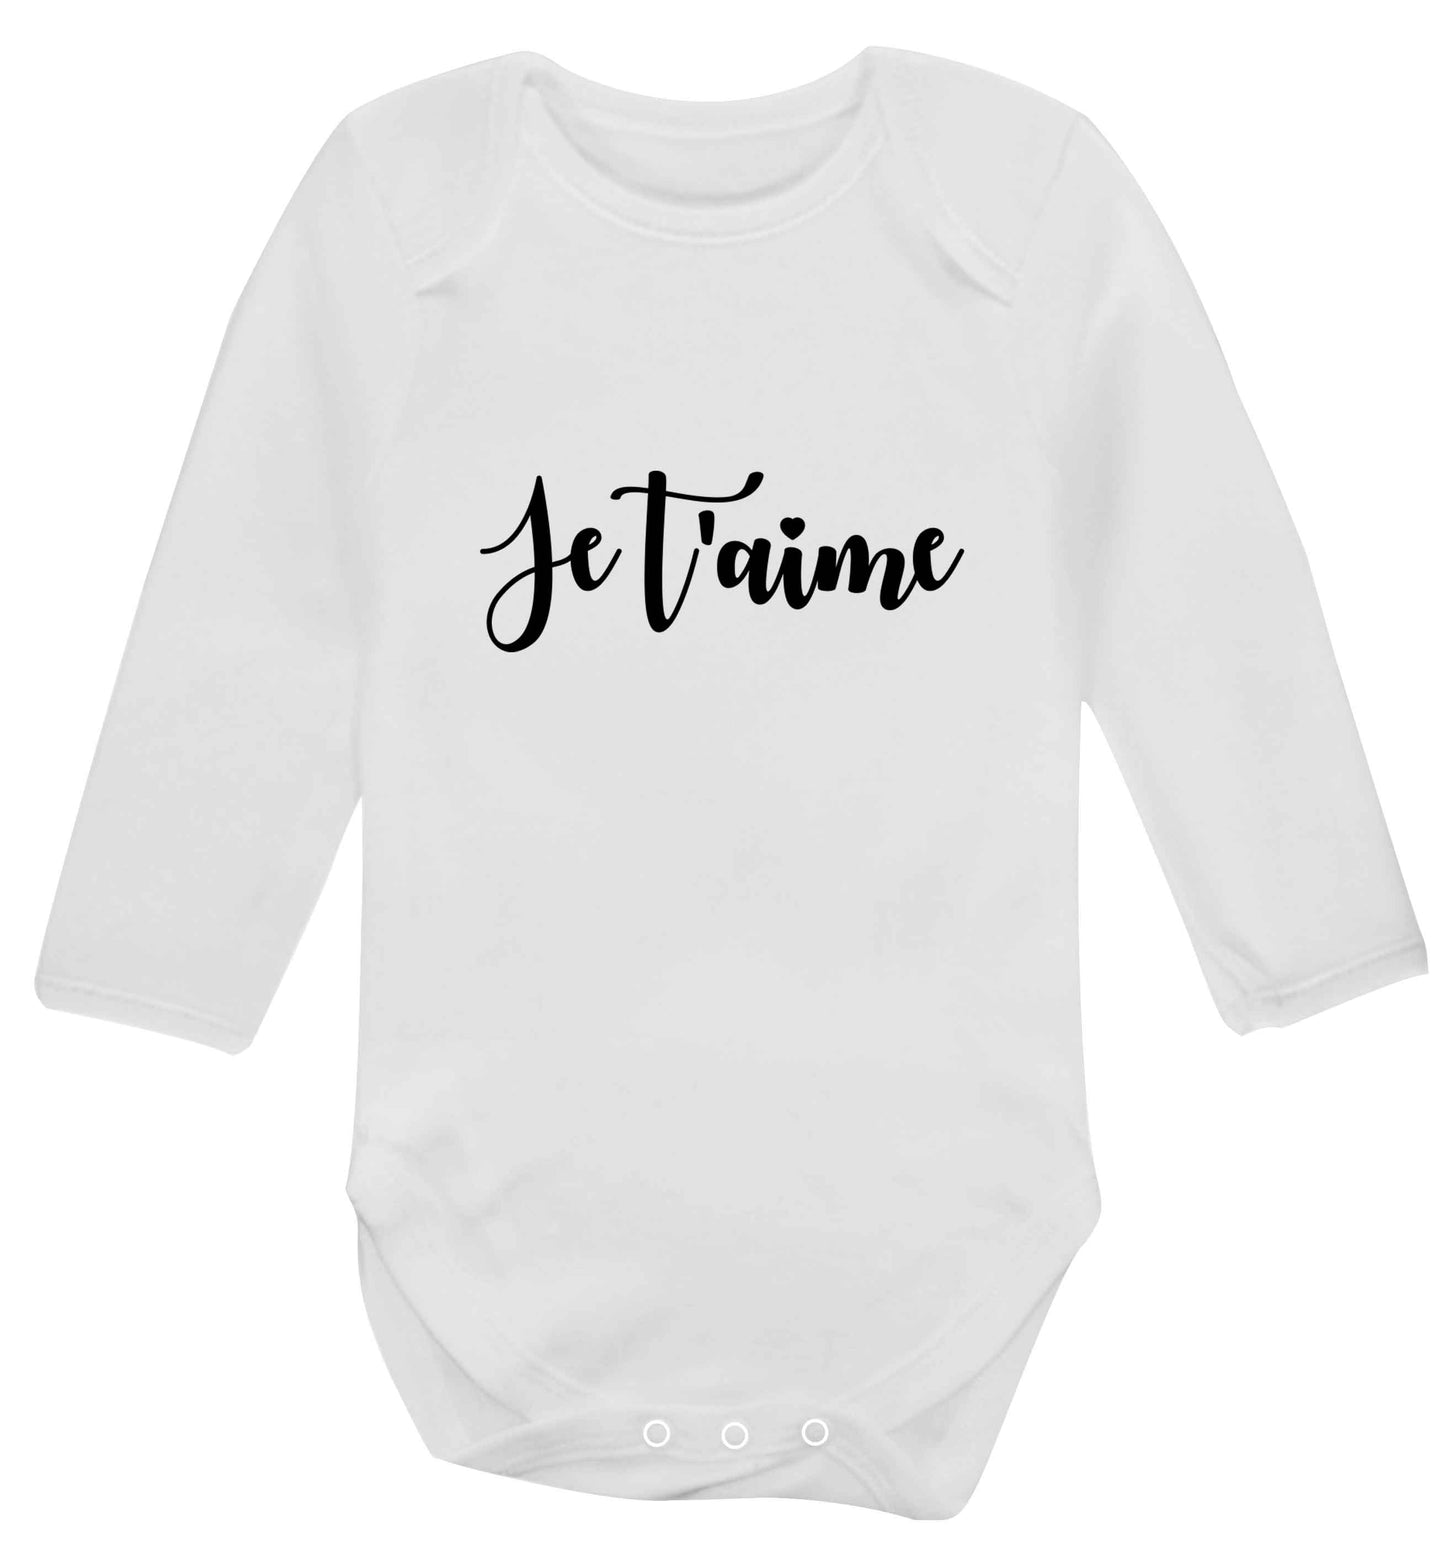 Je t'aime baby vest long sleeved white 6-12 months